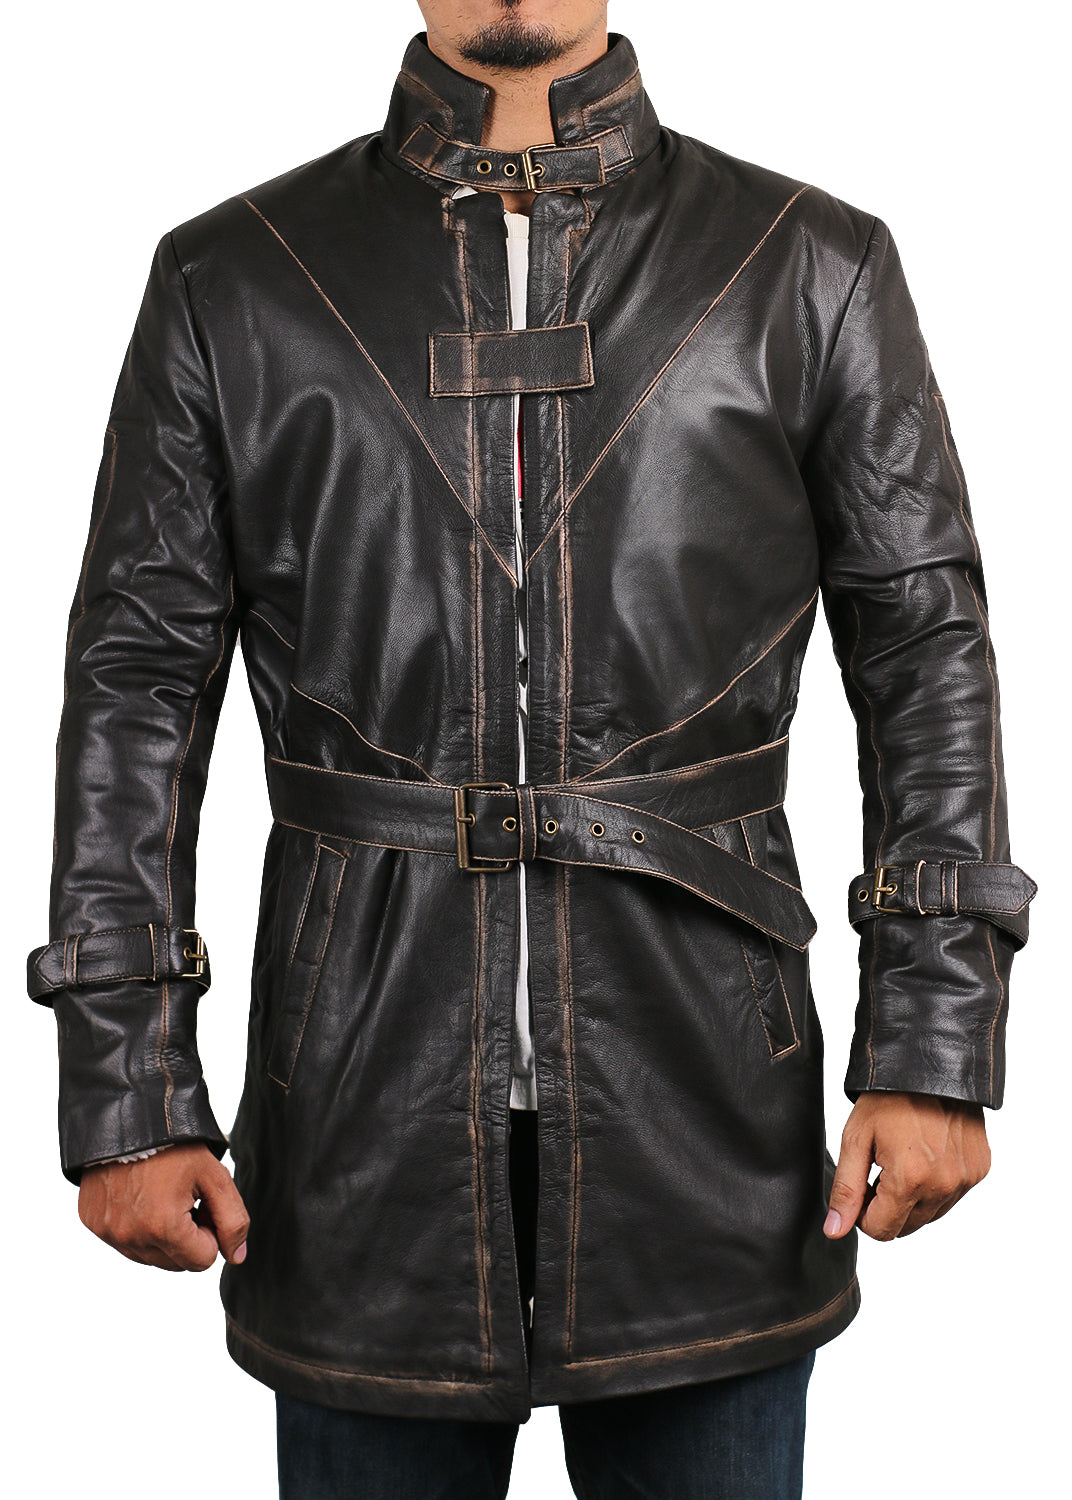 Leather Jackets Hub Mens Genuine Cow Ruboff Leather Over Coat (Black-Rubboff, Trench Coat) - 1702051